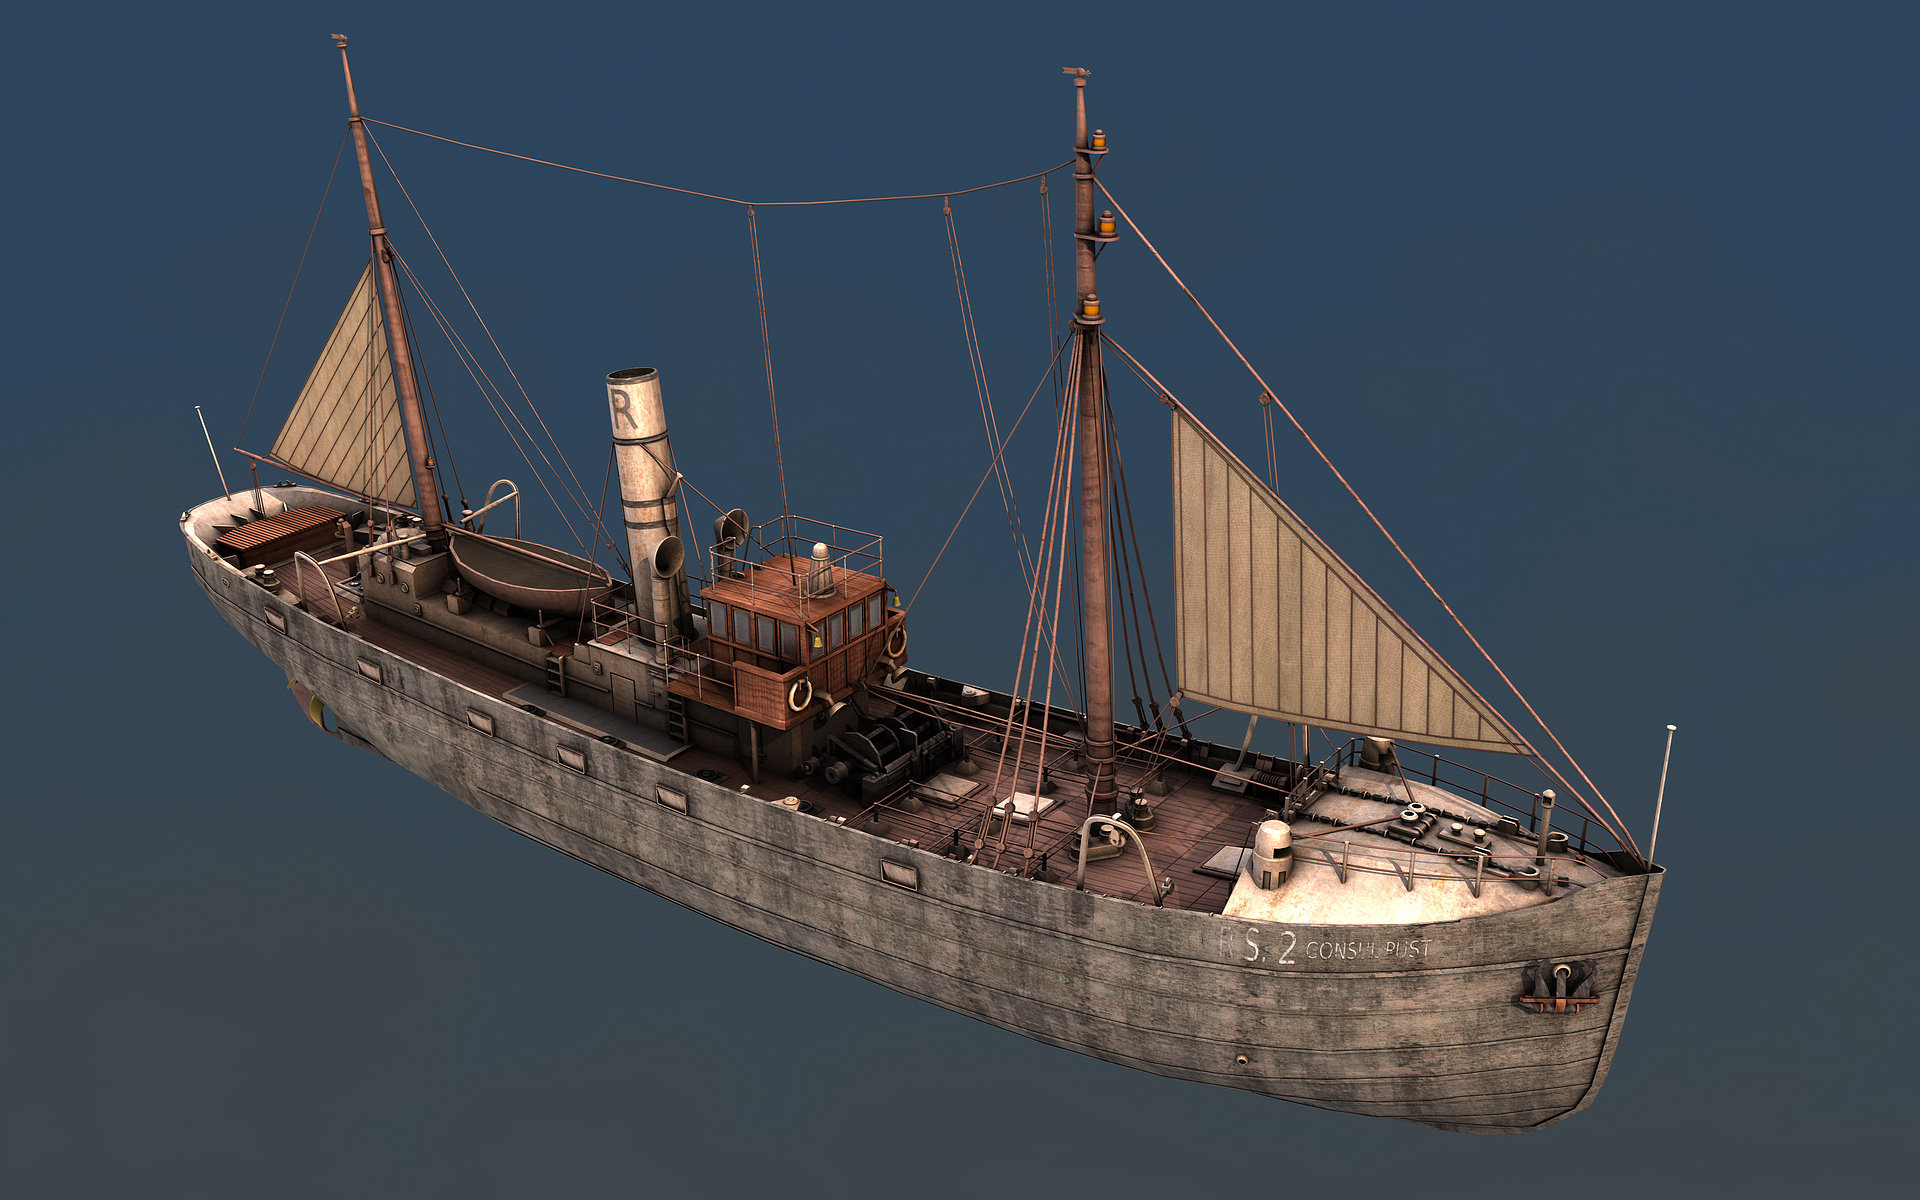 Fishing Trawler 1920 View 1 by eRe4s3r on DeviantArt